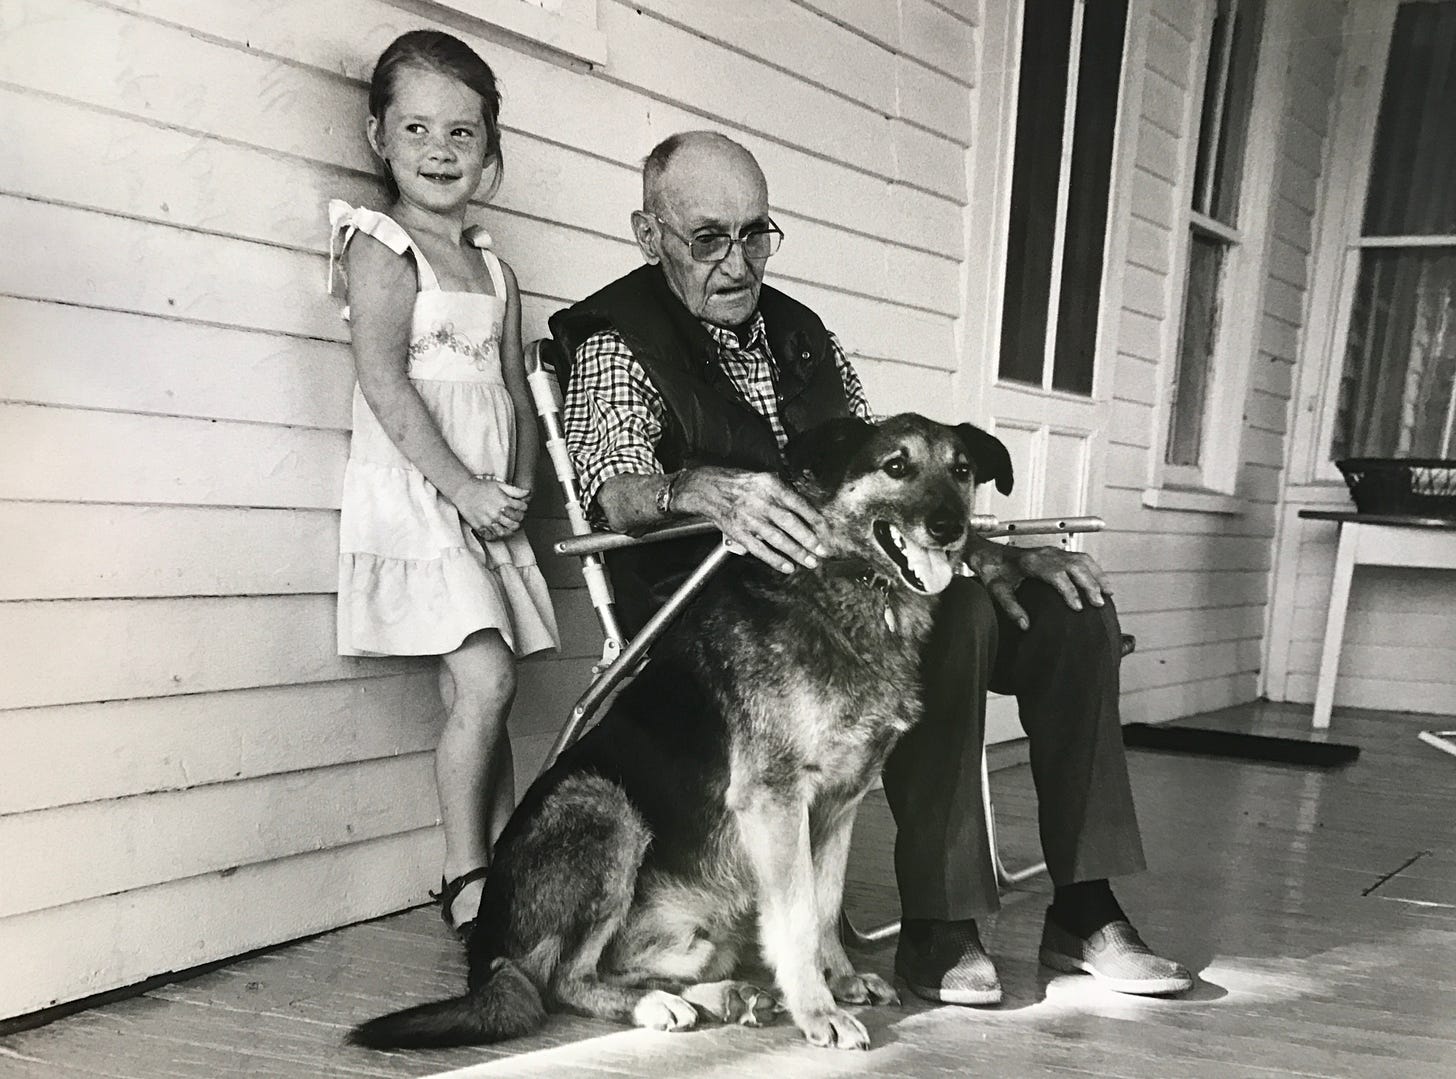 Black and white photo of Mary, Great uncle and dog